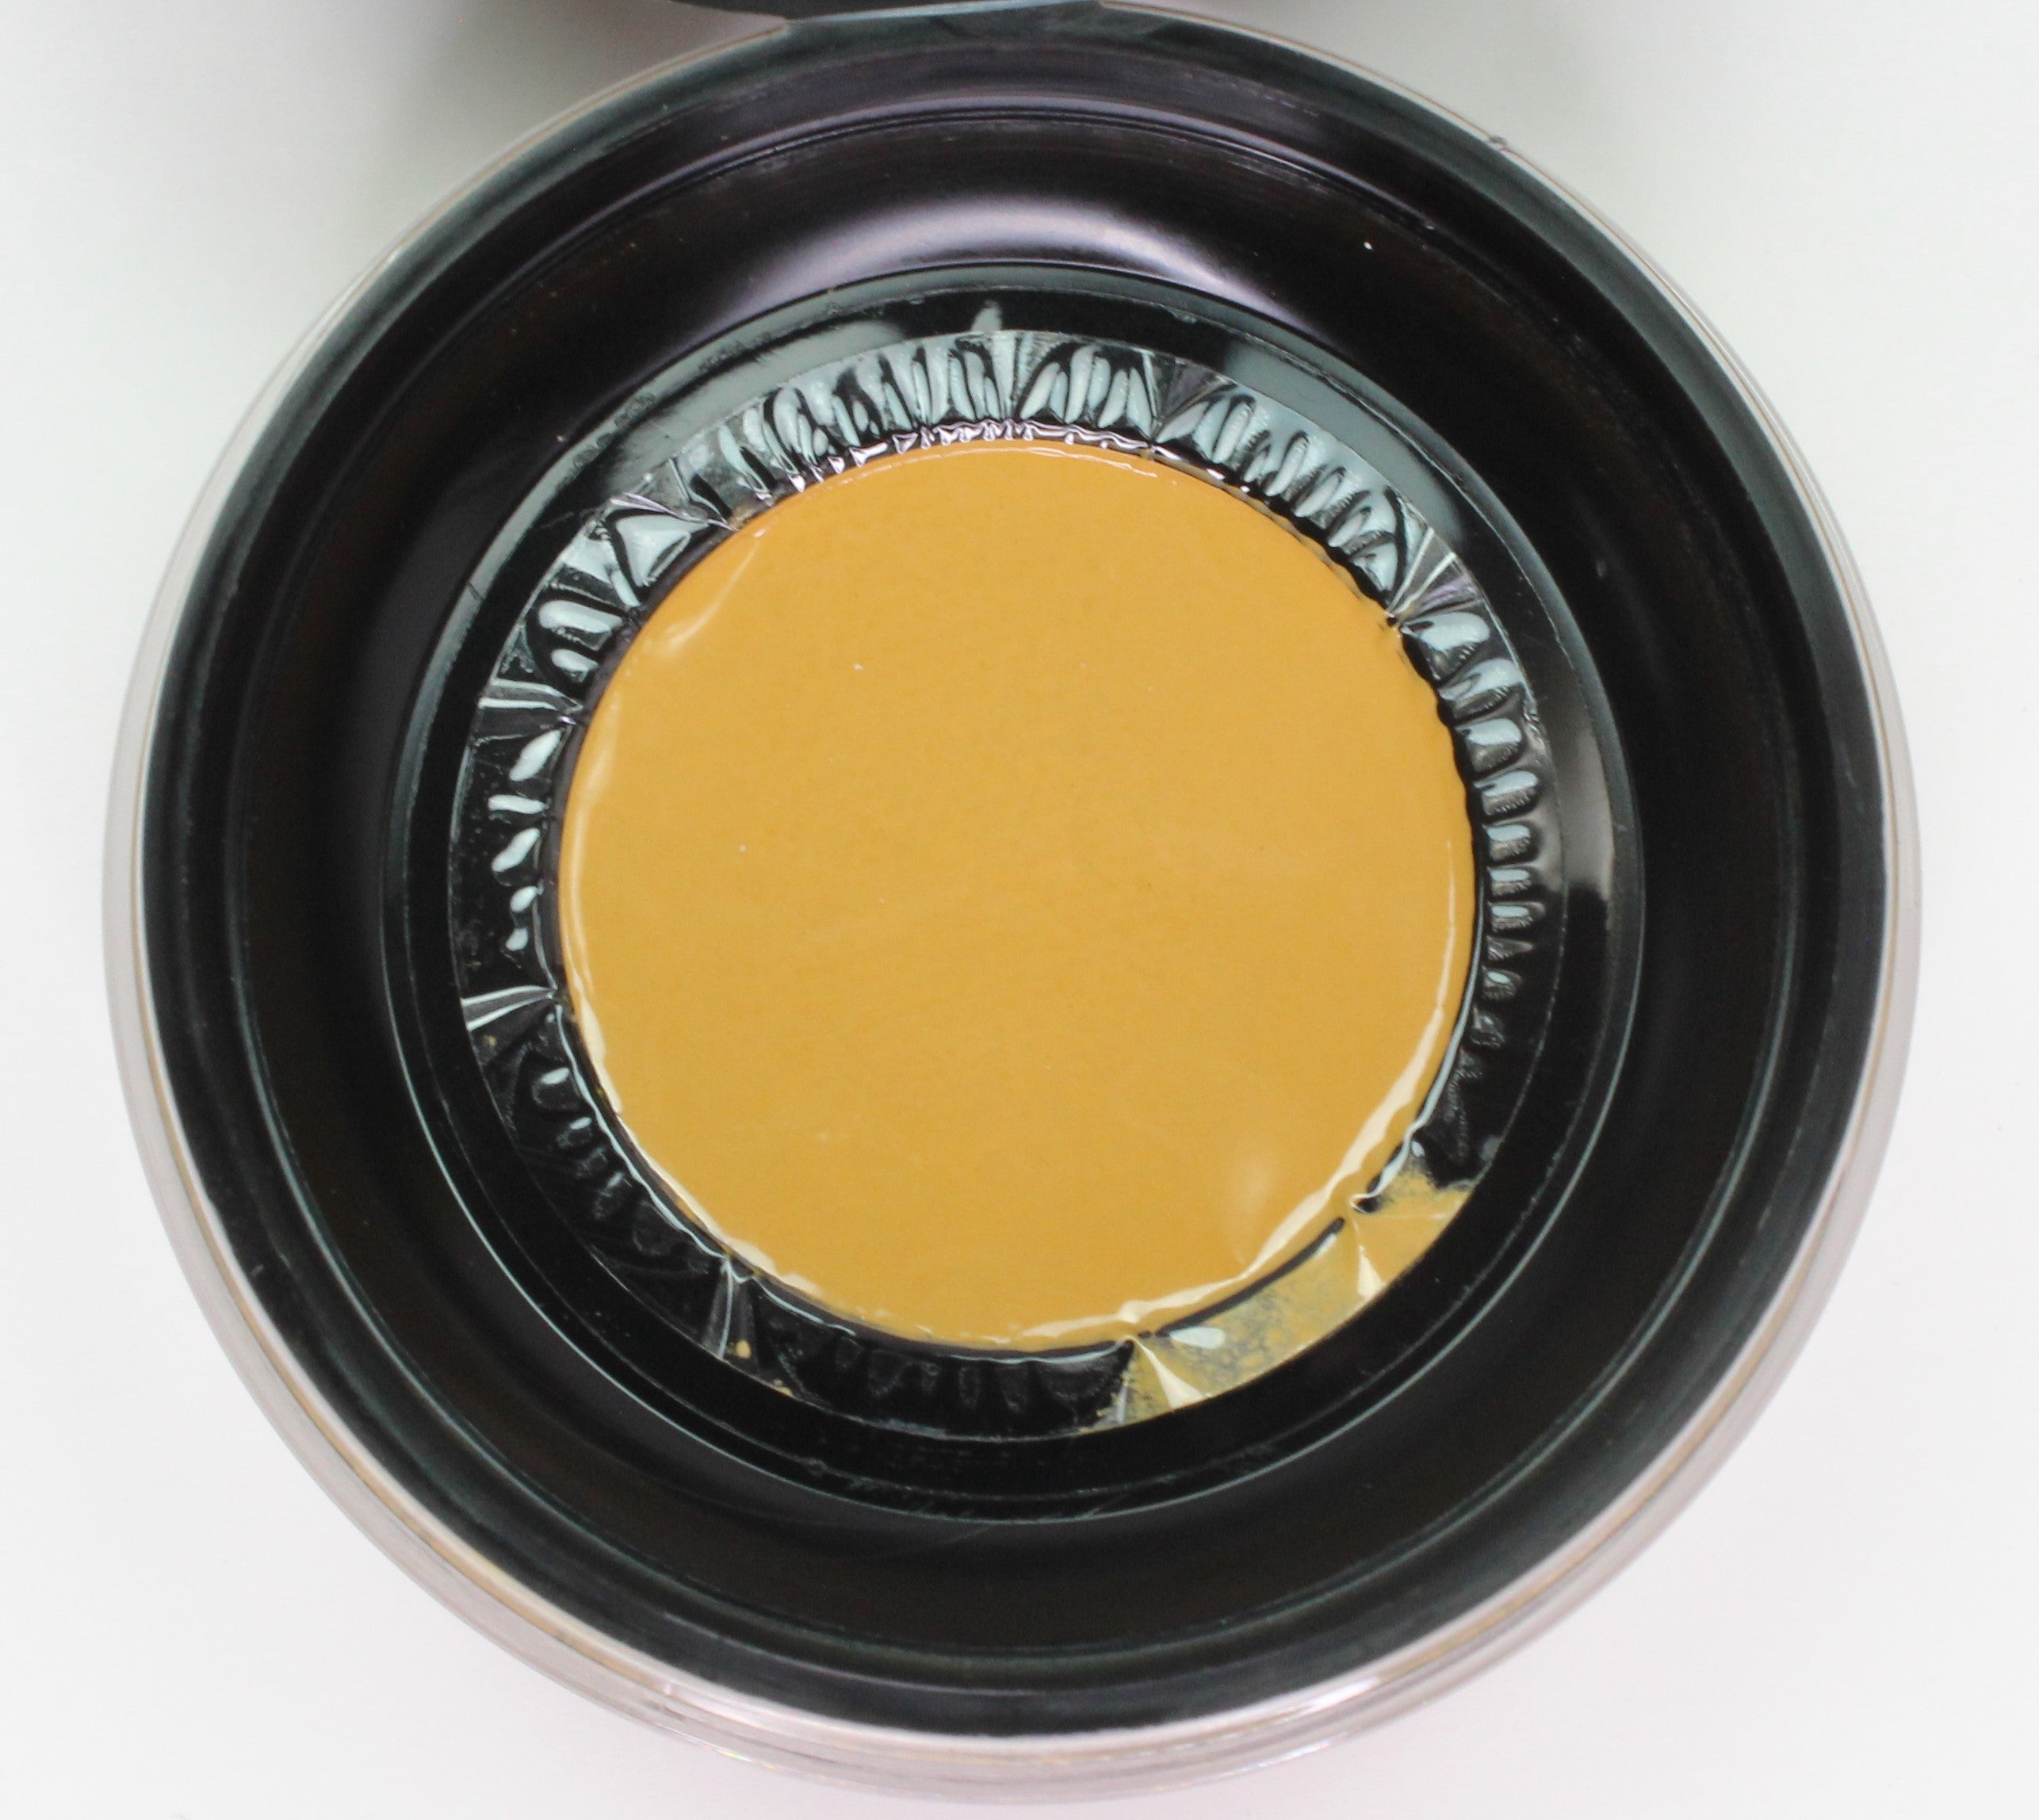 The Filtered Beauty Powder